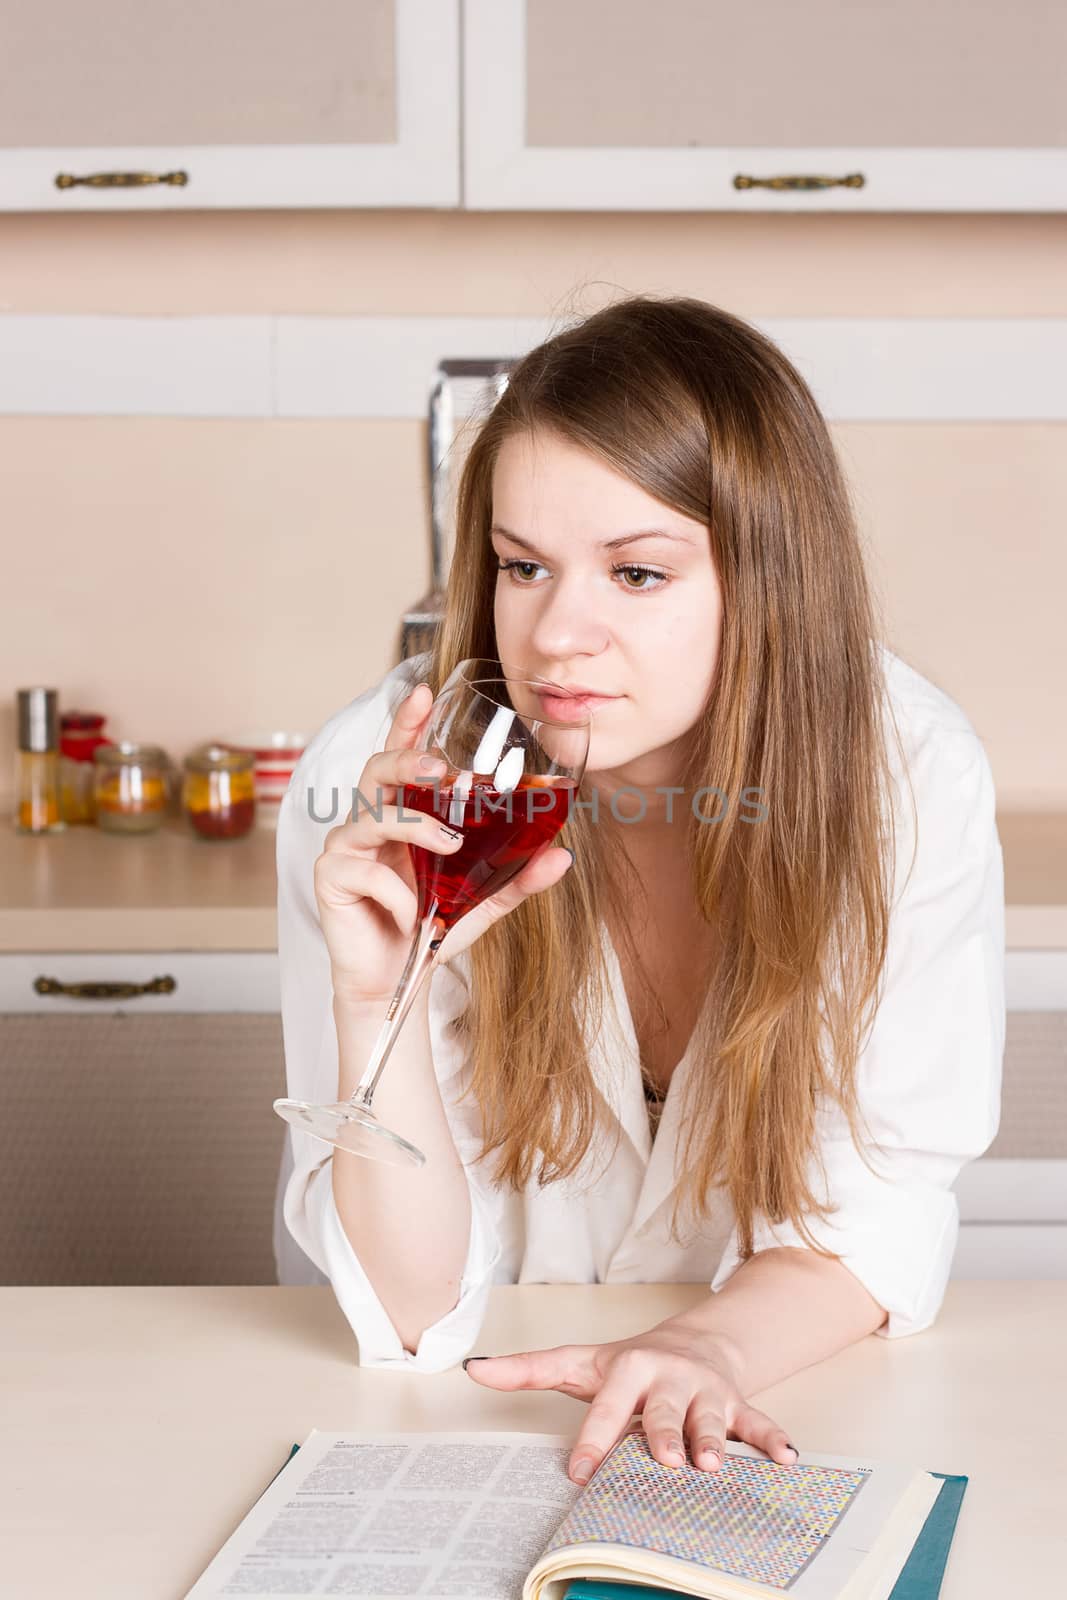 Girl with long flowing hair in  shirt in the kitchen with a glass of red wine